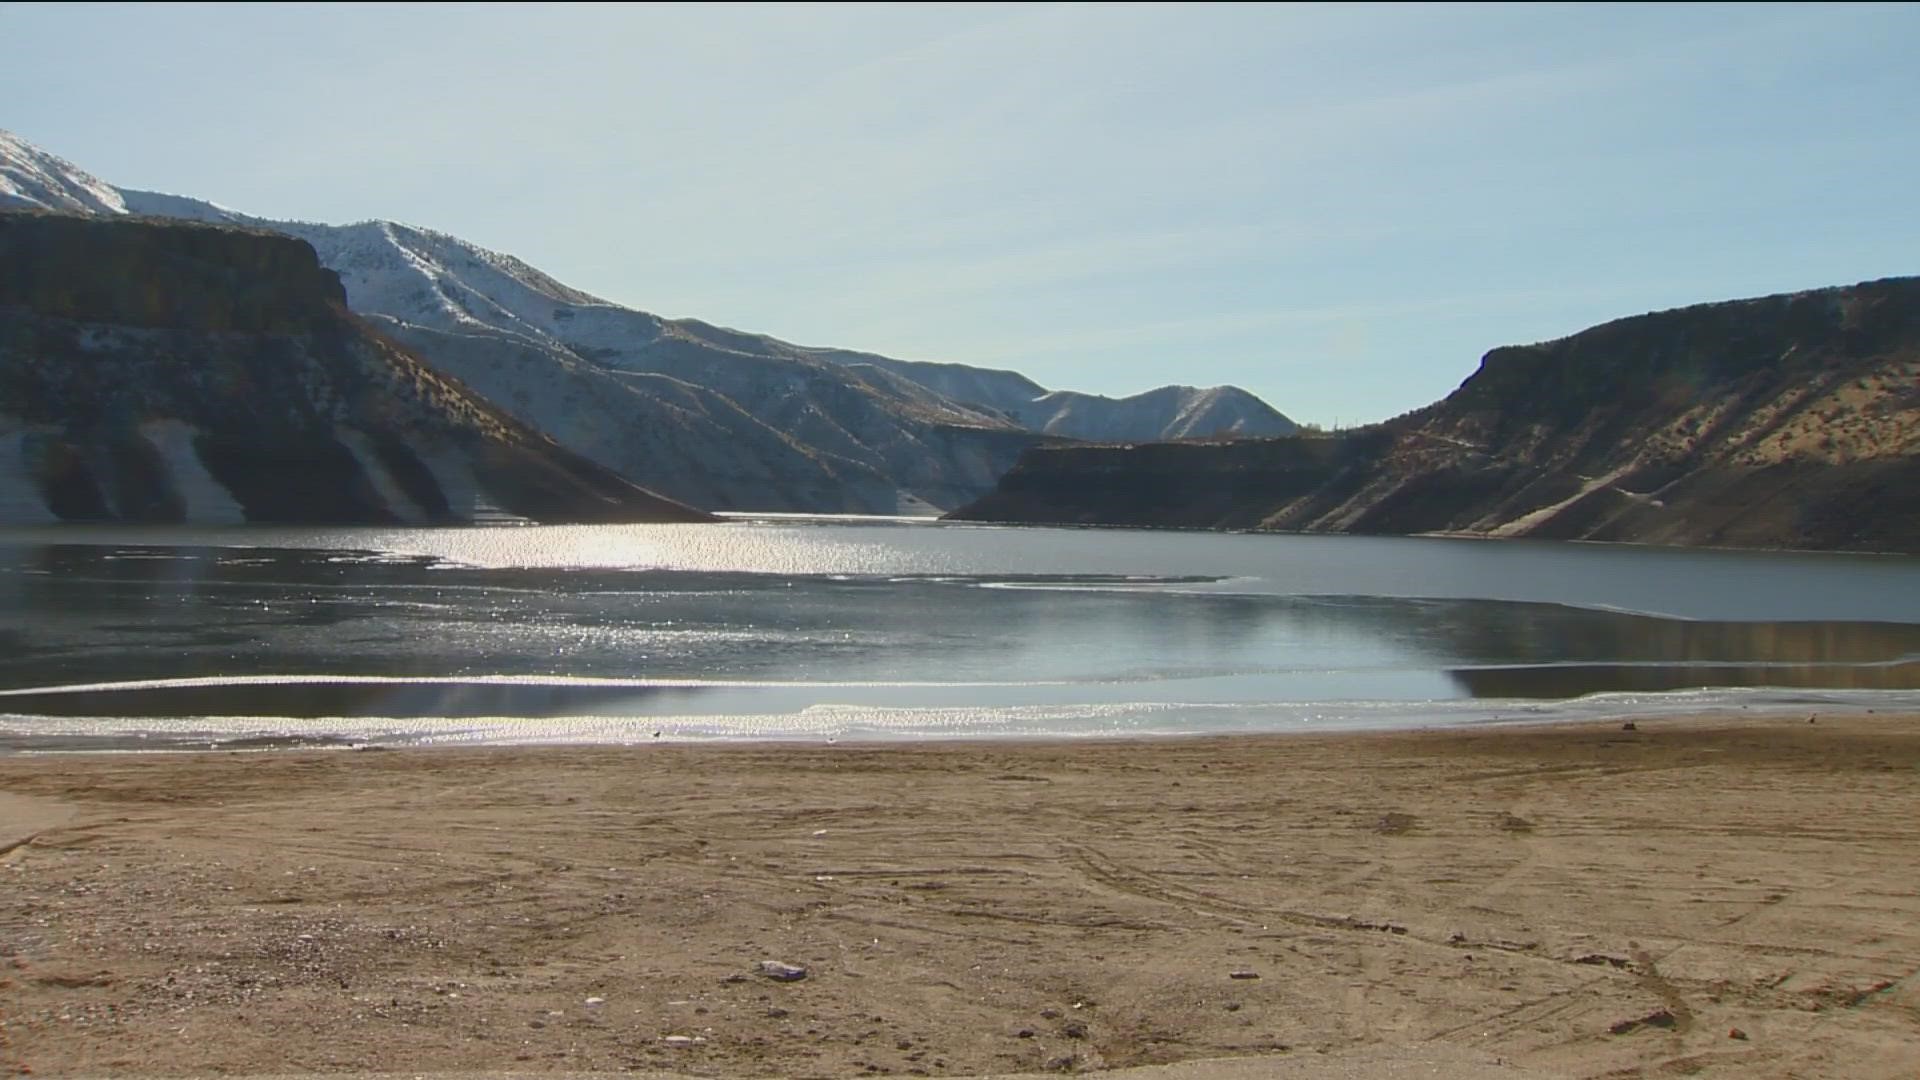 Idaho reservoir levels are currently above average. Meteorologist Sophia Bliss dove into the numbers and data for what Idahoans can expect for the next water year.